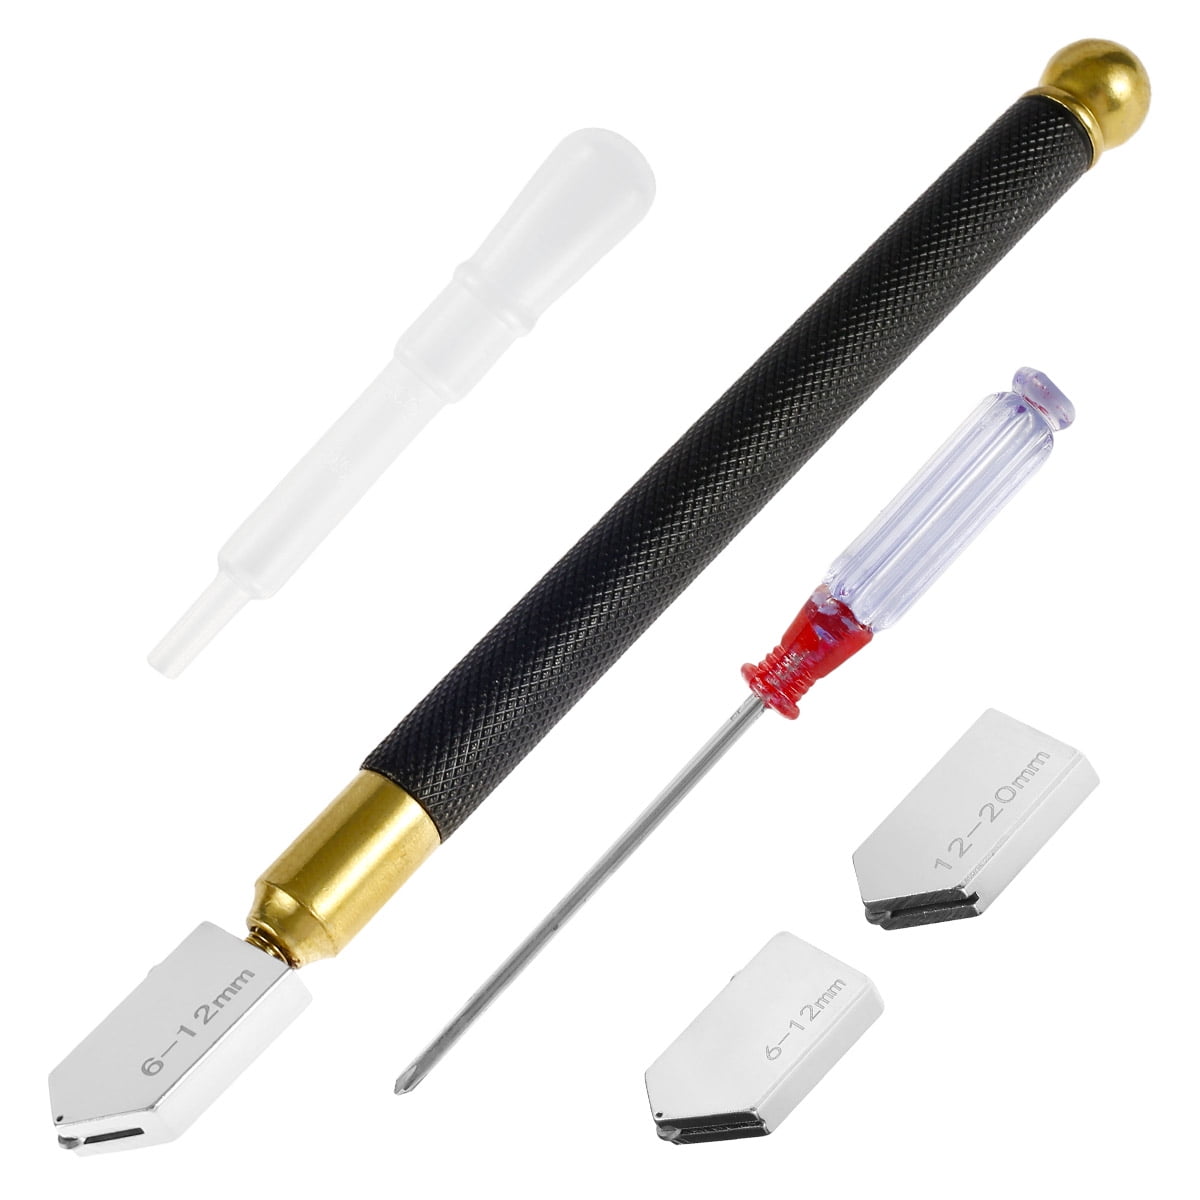 Glass Cutters Tool for Thick Glass Tiles Mirror Mosaic Cutting in The Range  2-20mm- Diamond Glass Cutter Tile Cutter with Ergonomic Handle and  Replaceable 3 Carbide Cutting Heads 5Pcs Glass Cutters